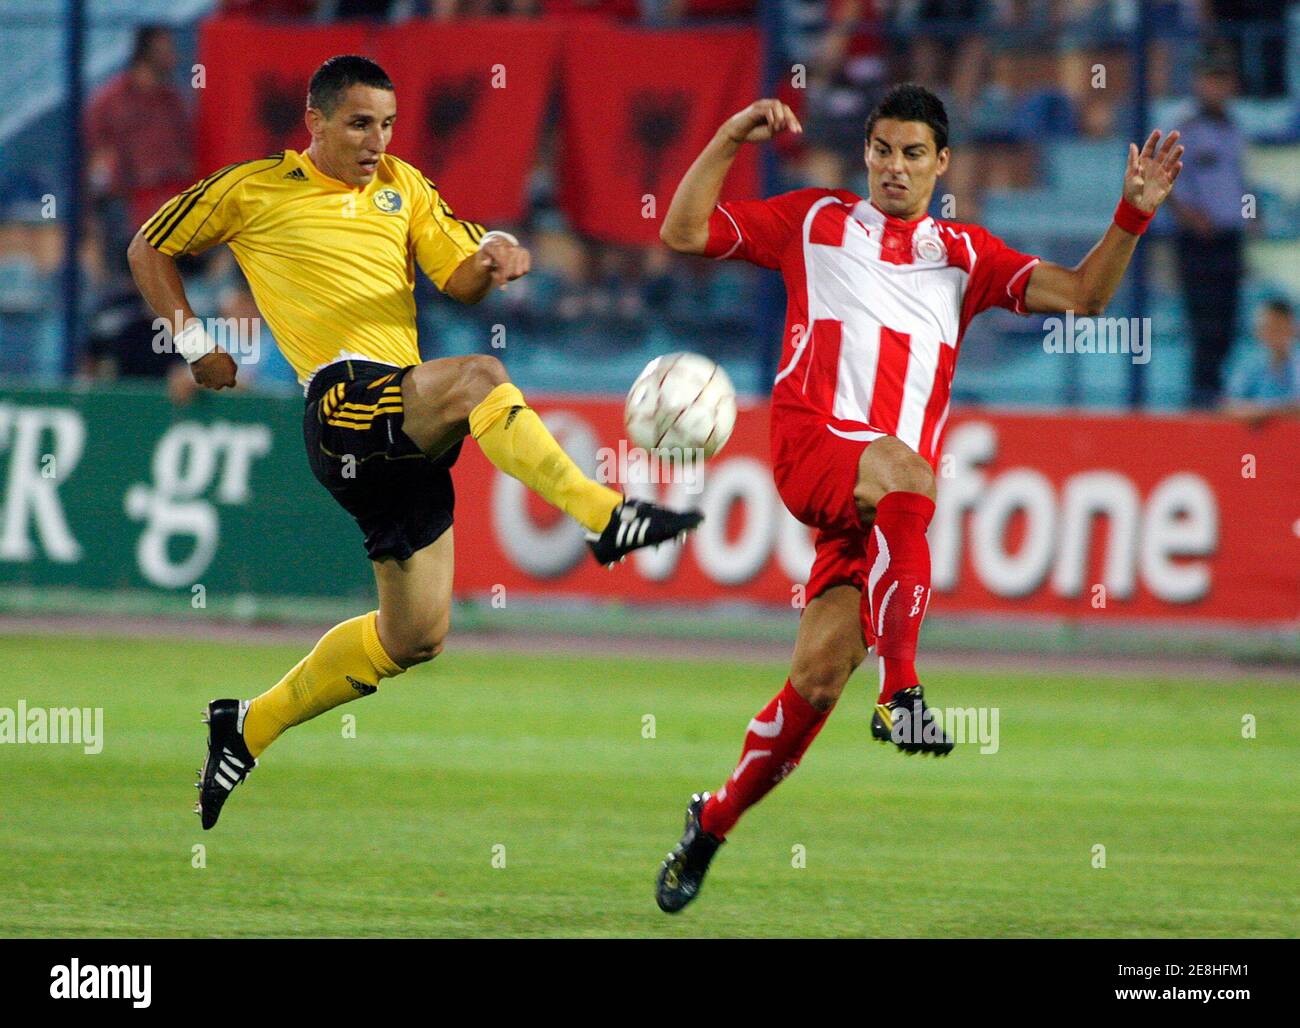 Betim Aliju of KS Besa Kavaje (L) fights for the ball with Savier Discas  Gonzales of Olympiacos FC during the first leg of their UEFA Europa League  second qualifying round soccer match